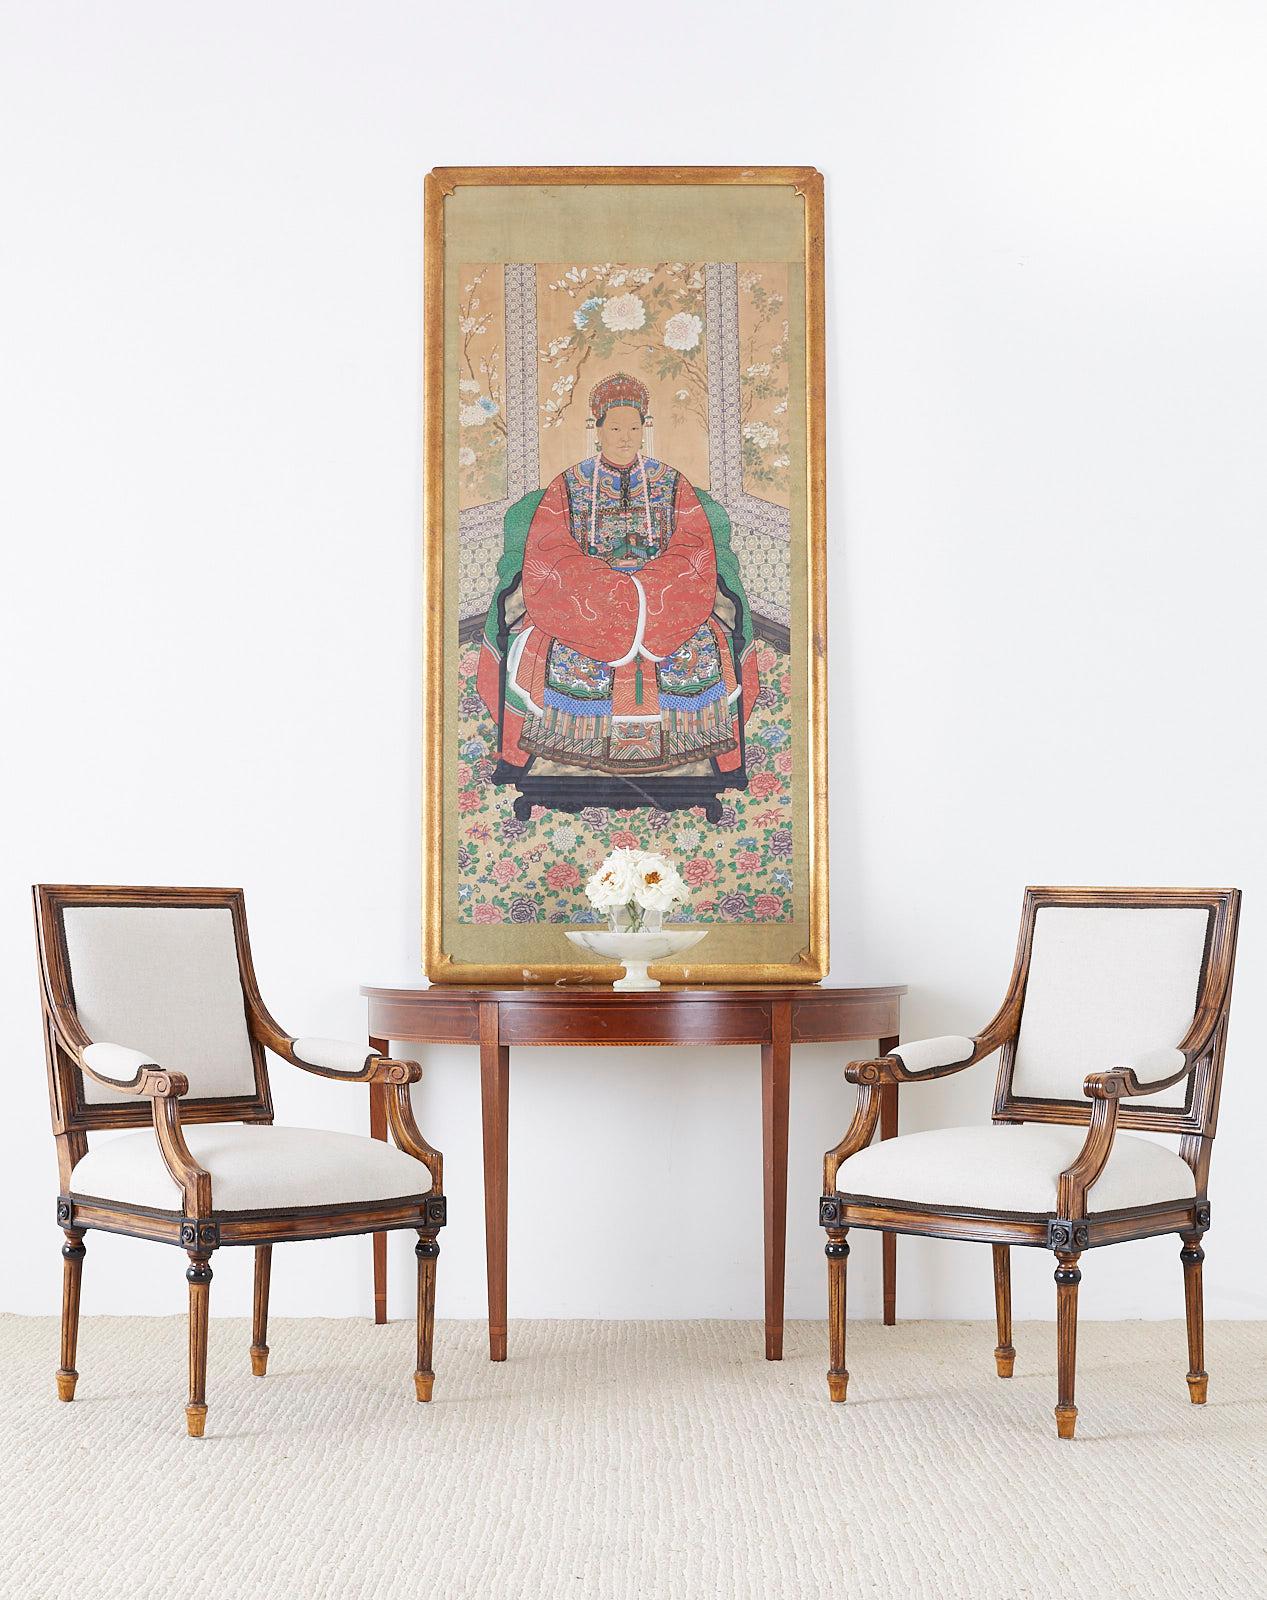 Monumental Chinese late Qing dynasty ancestor scroll portrait painting of a high ranking official or Imperial court matriarch. Features a woman seated in a room wearing an intricately decorated Ming style robe and headdress. The room has open window